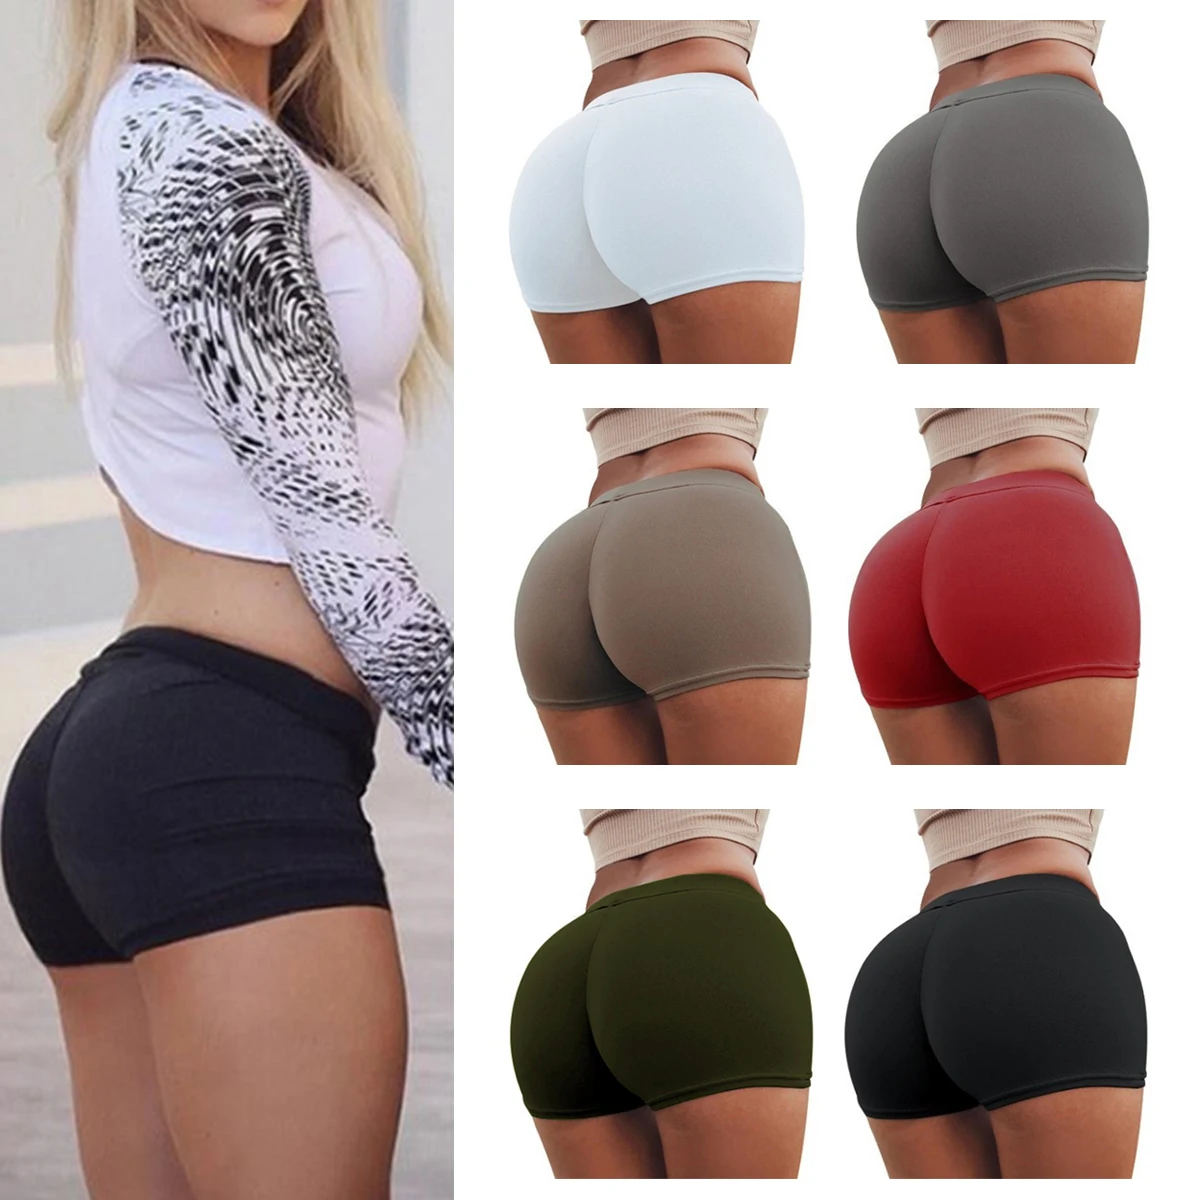 

Sexy Women Underwear Seamless Safety Short Pants Sport Skintight Women's Breathable Shorts Gym Fitness Anti-Emptied Pants